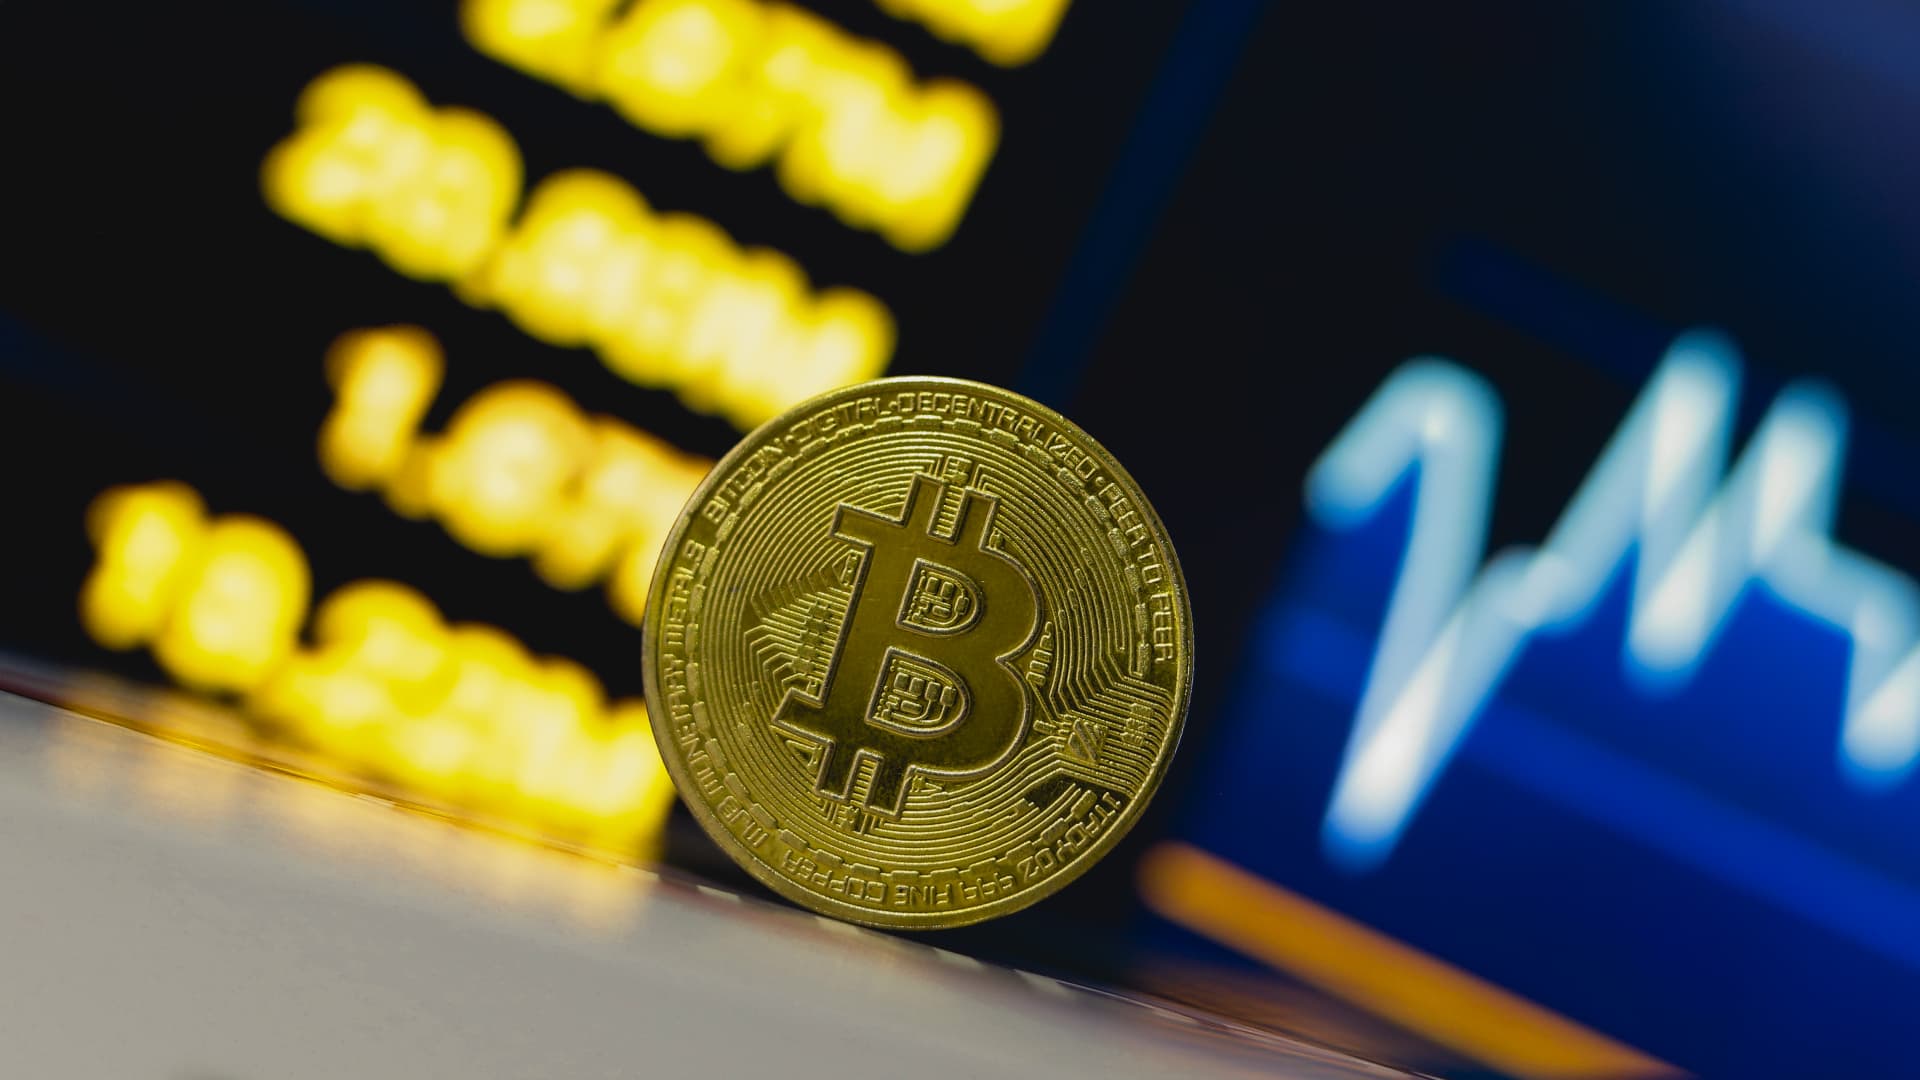 Bitcoin reverses lower as investors digest Trump crypto comments, central bank meetings